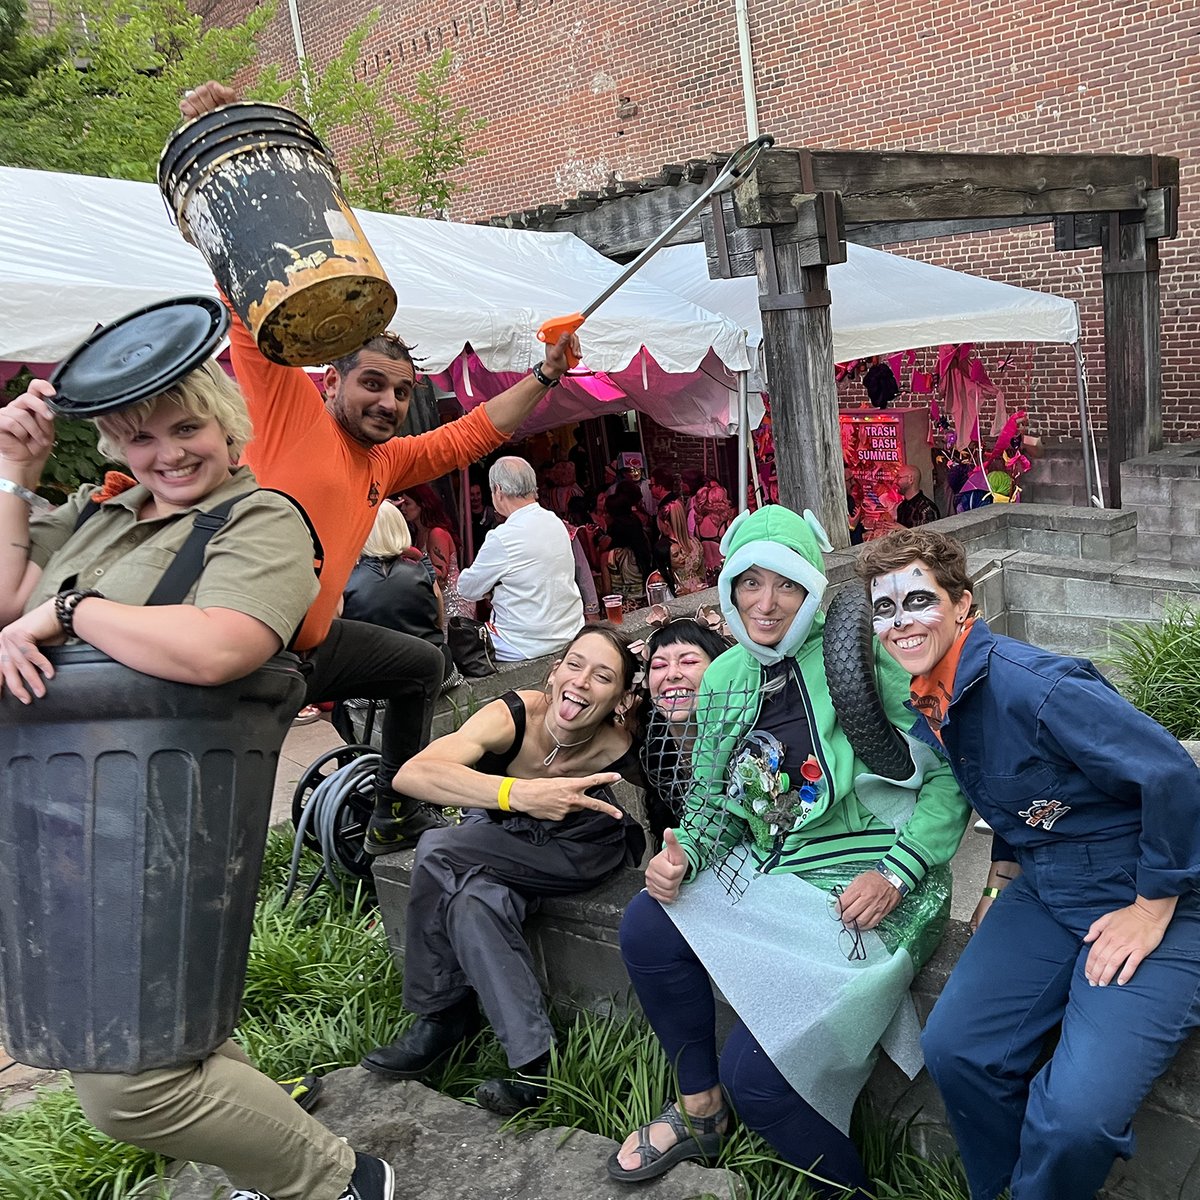 Our CleanWays crew has extensive experience partying in trash, lol. Thanks for inviting us to last week's Trash Bash @mattressfactory!